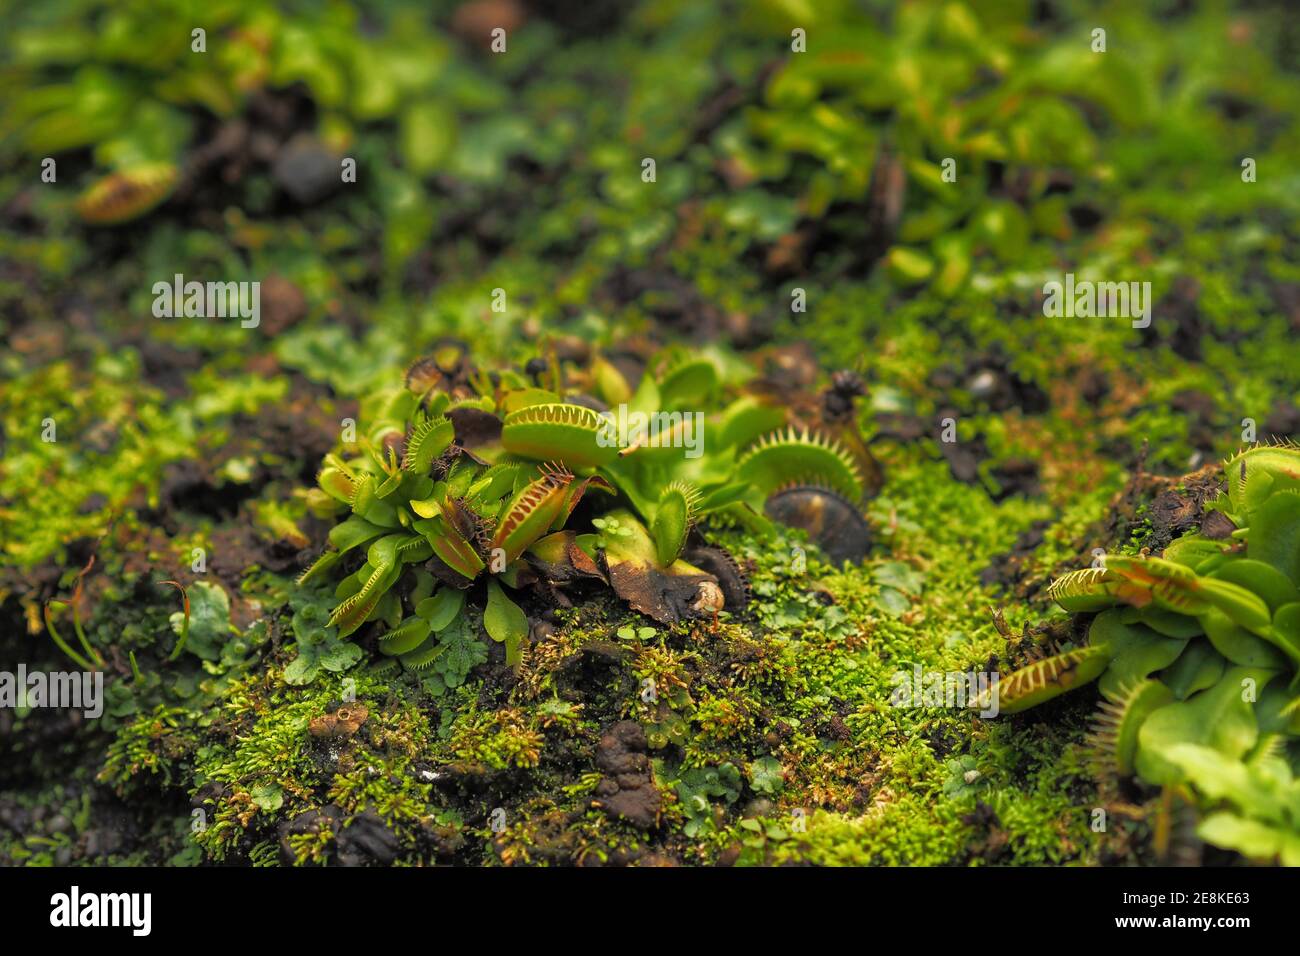 Soft focus on Small Venus Flytrap or Dionaea Muscipula on the ground with moss Stock Photo